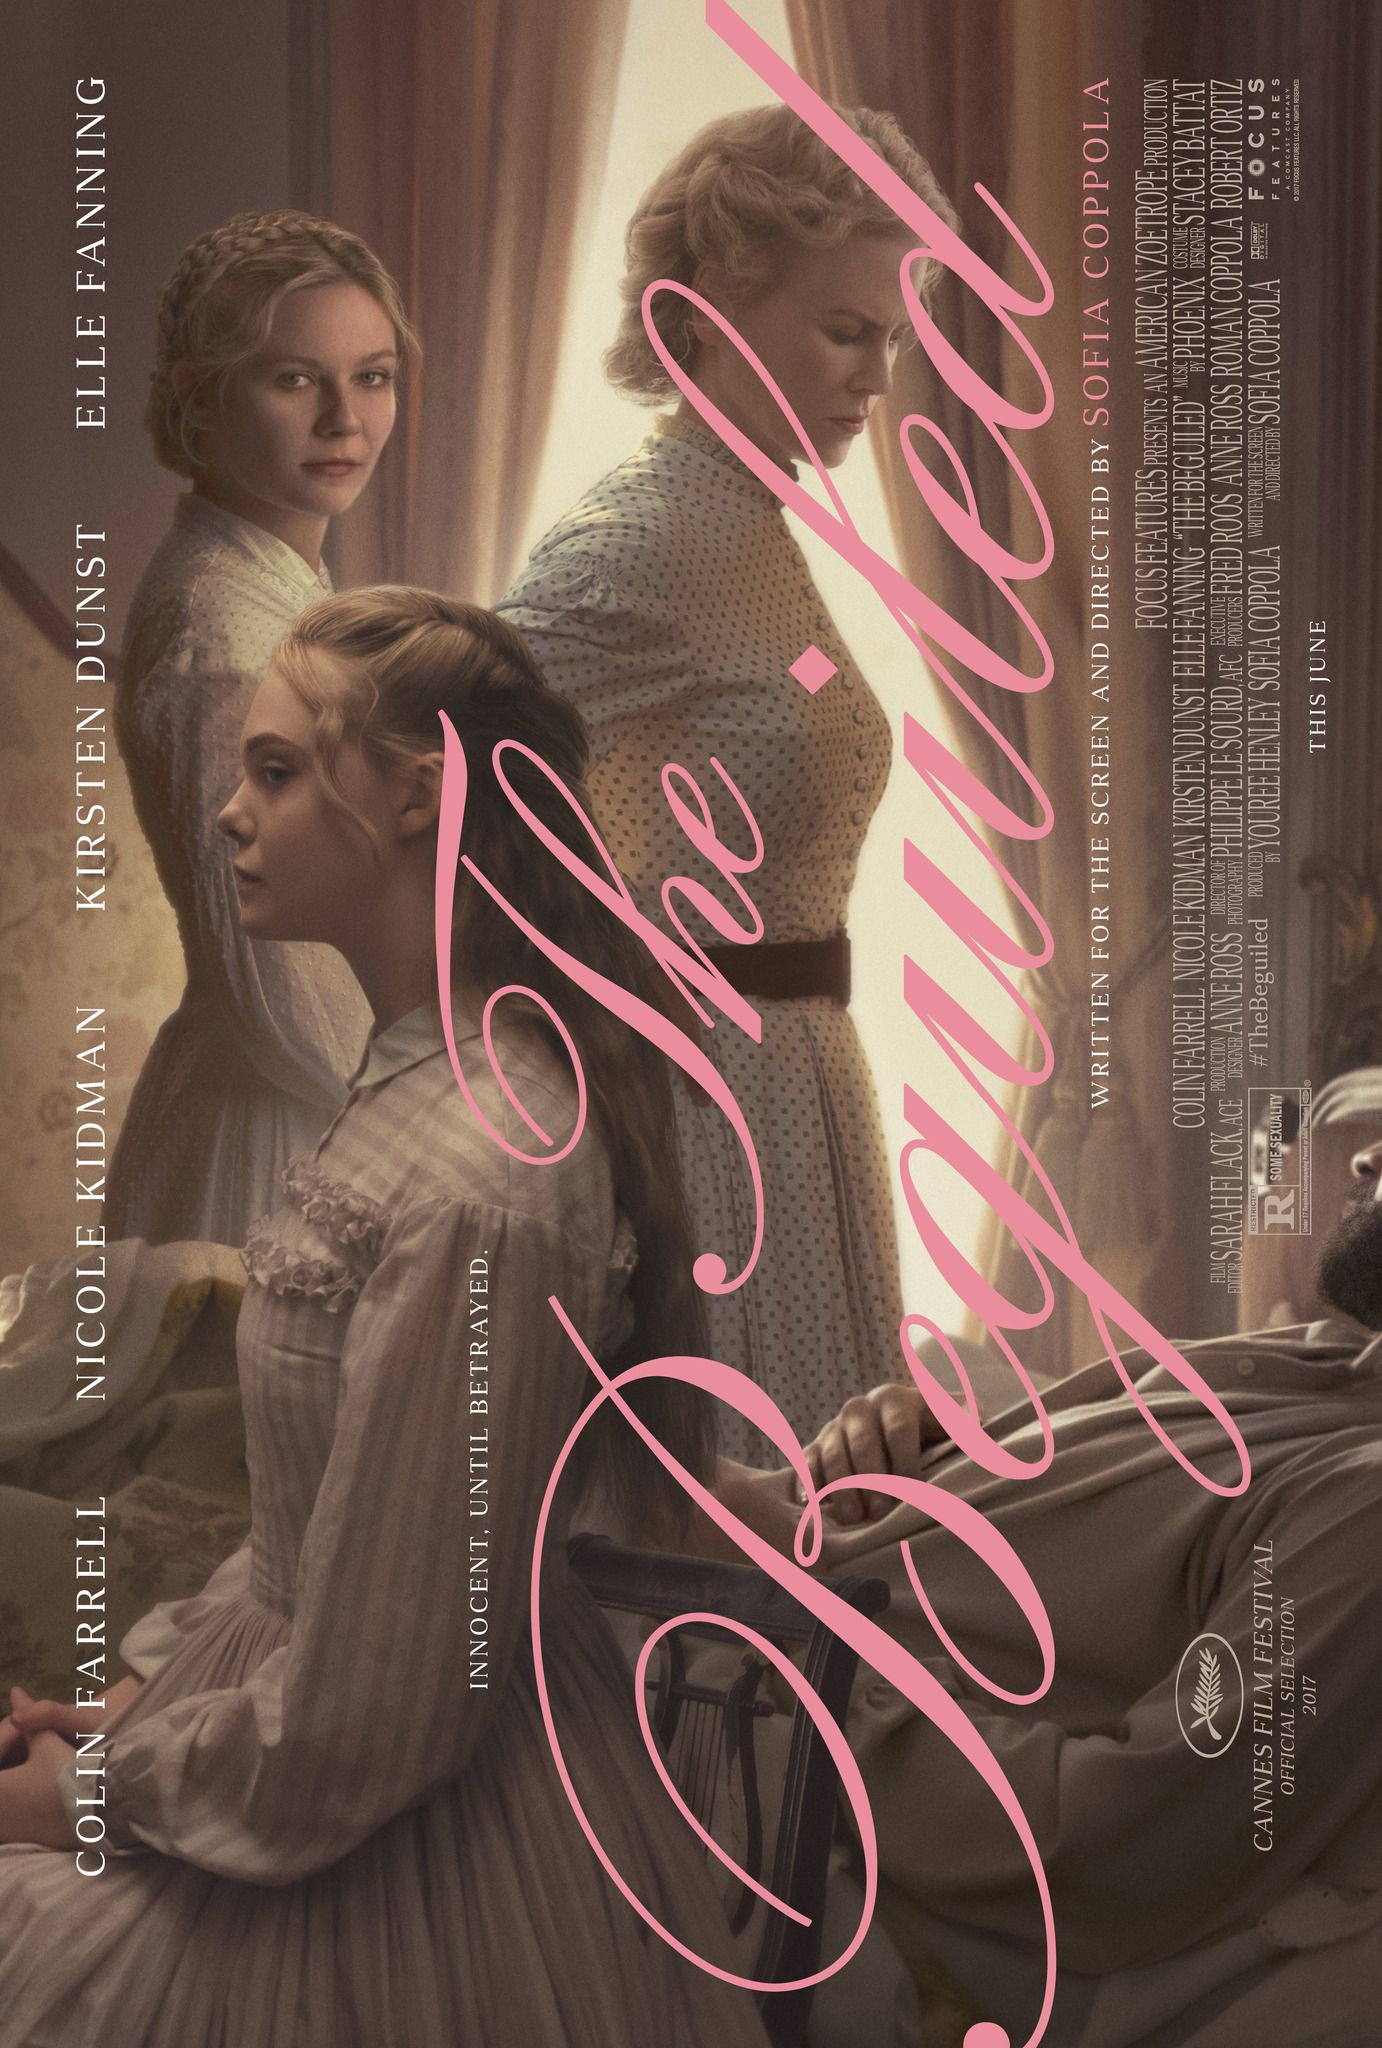 The Beguiled (2017) Hindi Dubbed BluRay download full movie